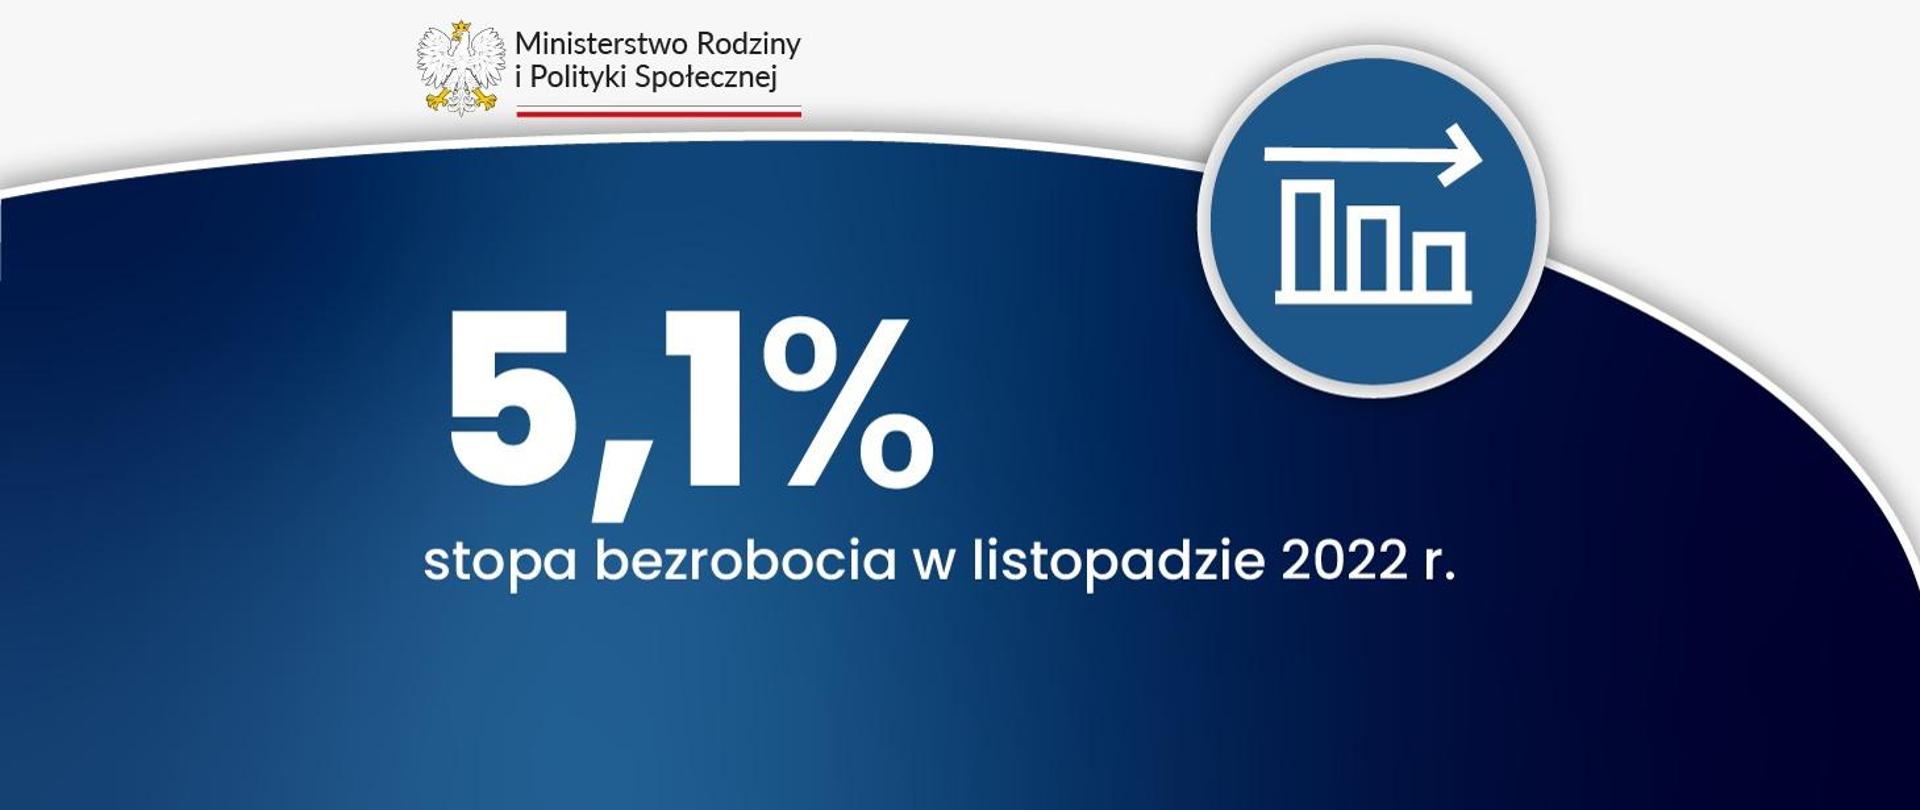 Ministry of Family and Social Policy: Unemployment rate still at the level of 5.1%